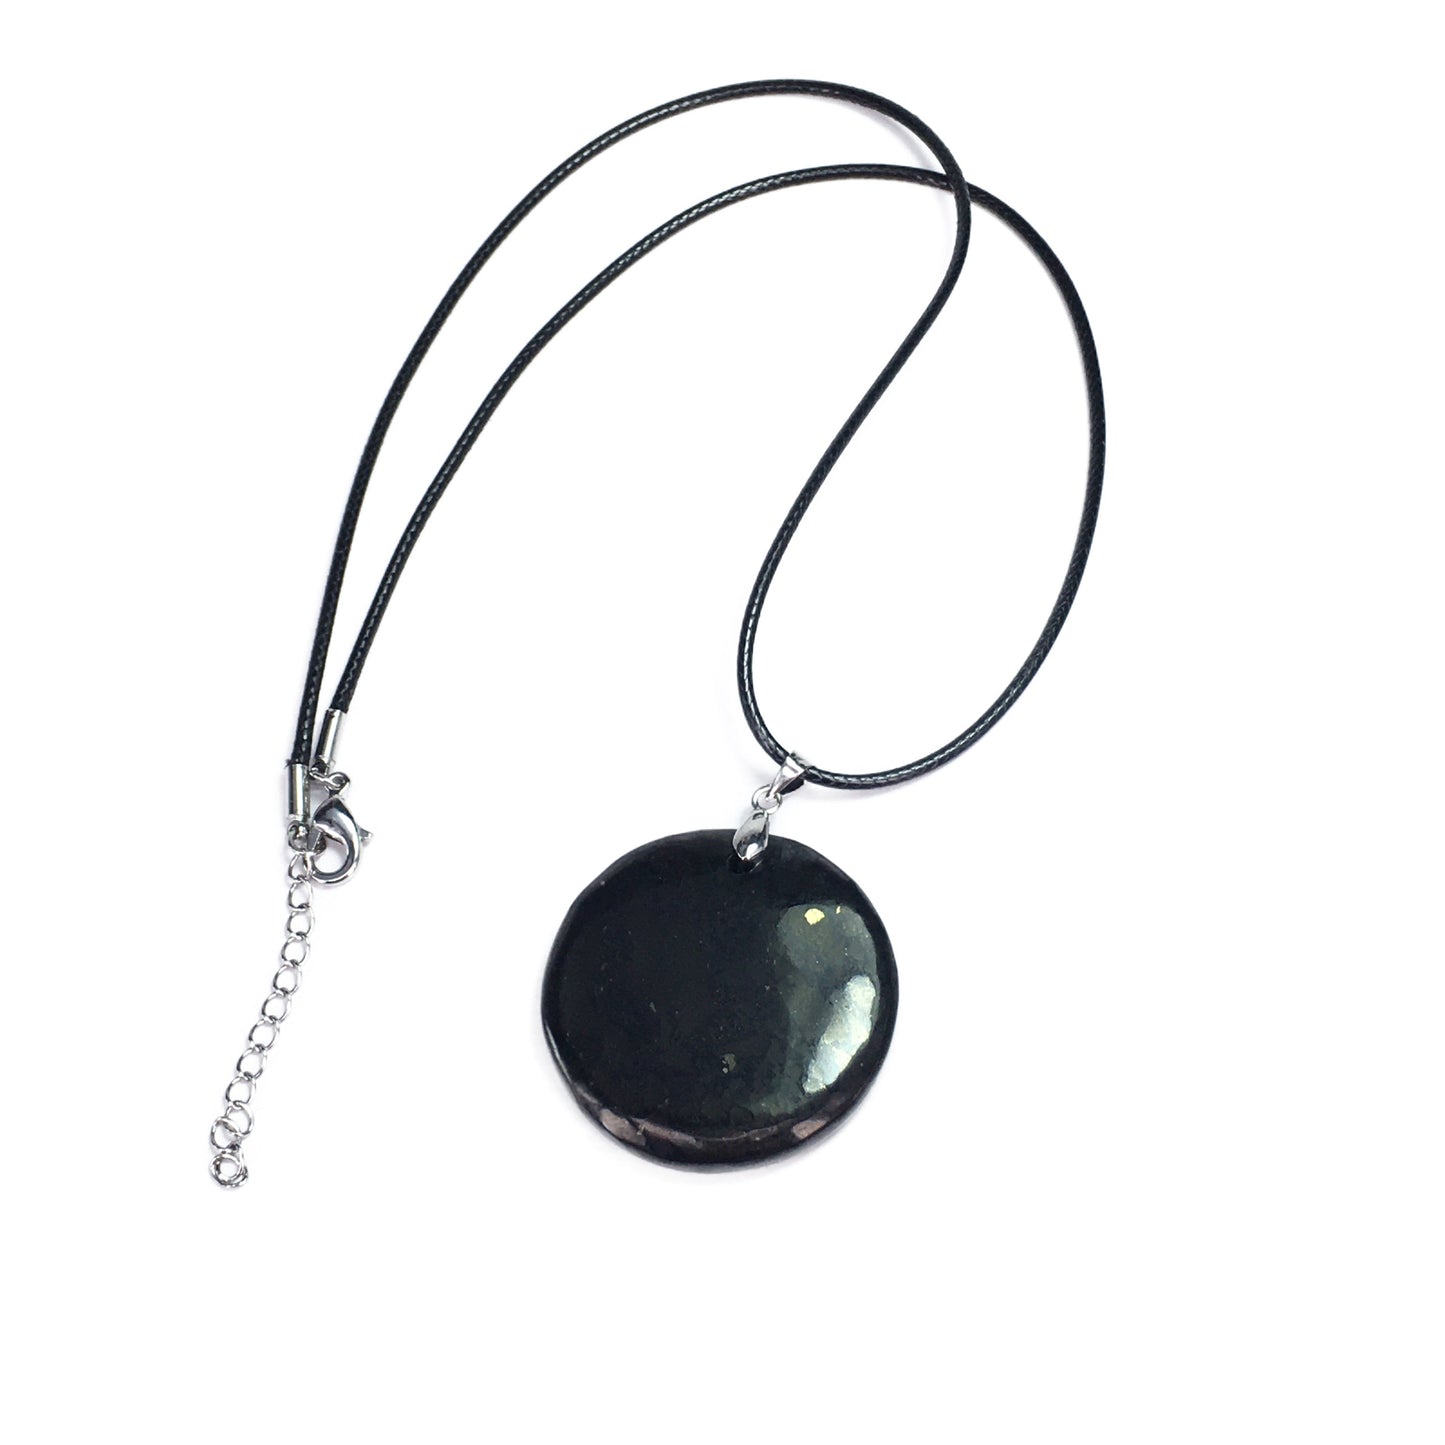 Shungite Coin Shape Pendant 35mm With Leather Cord Necklace